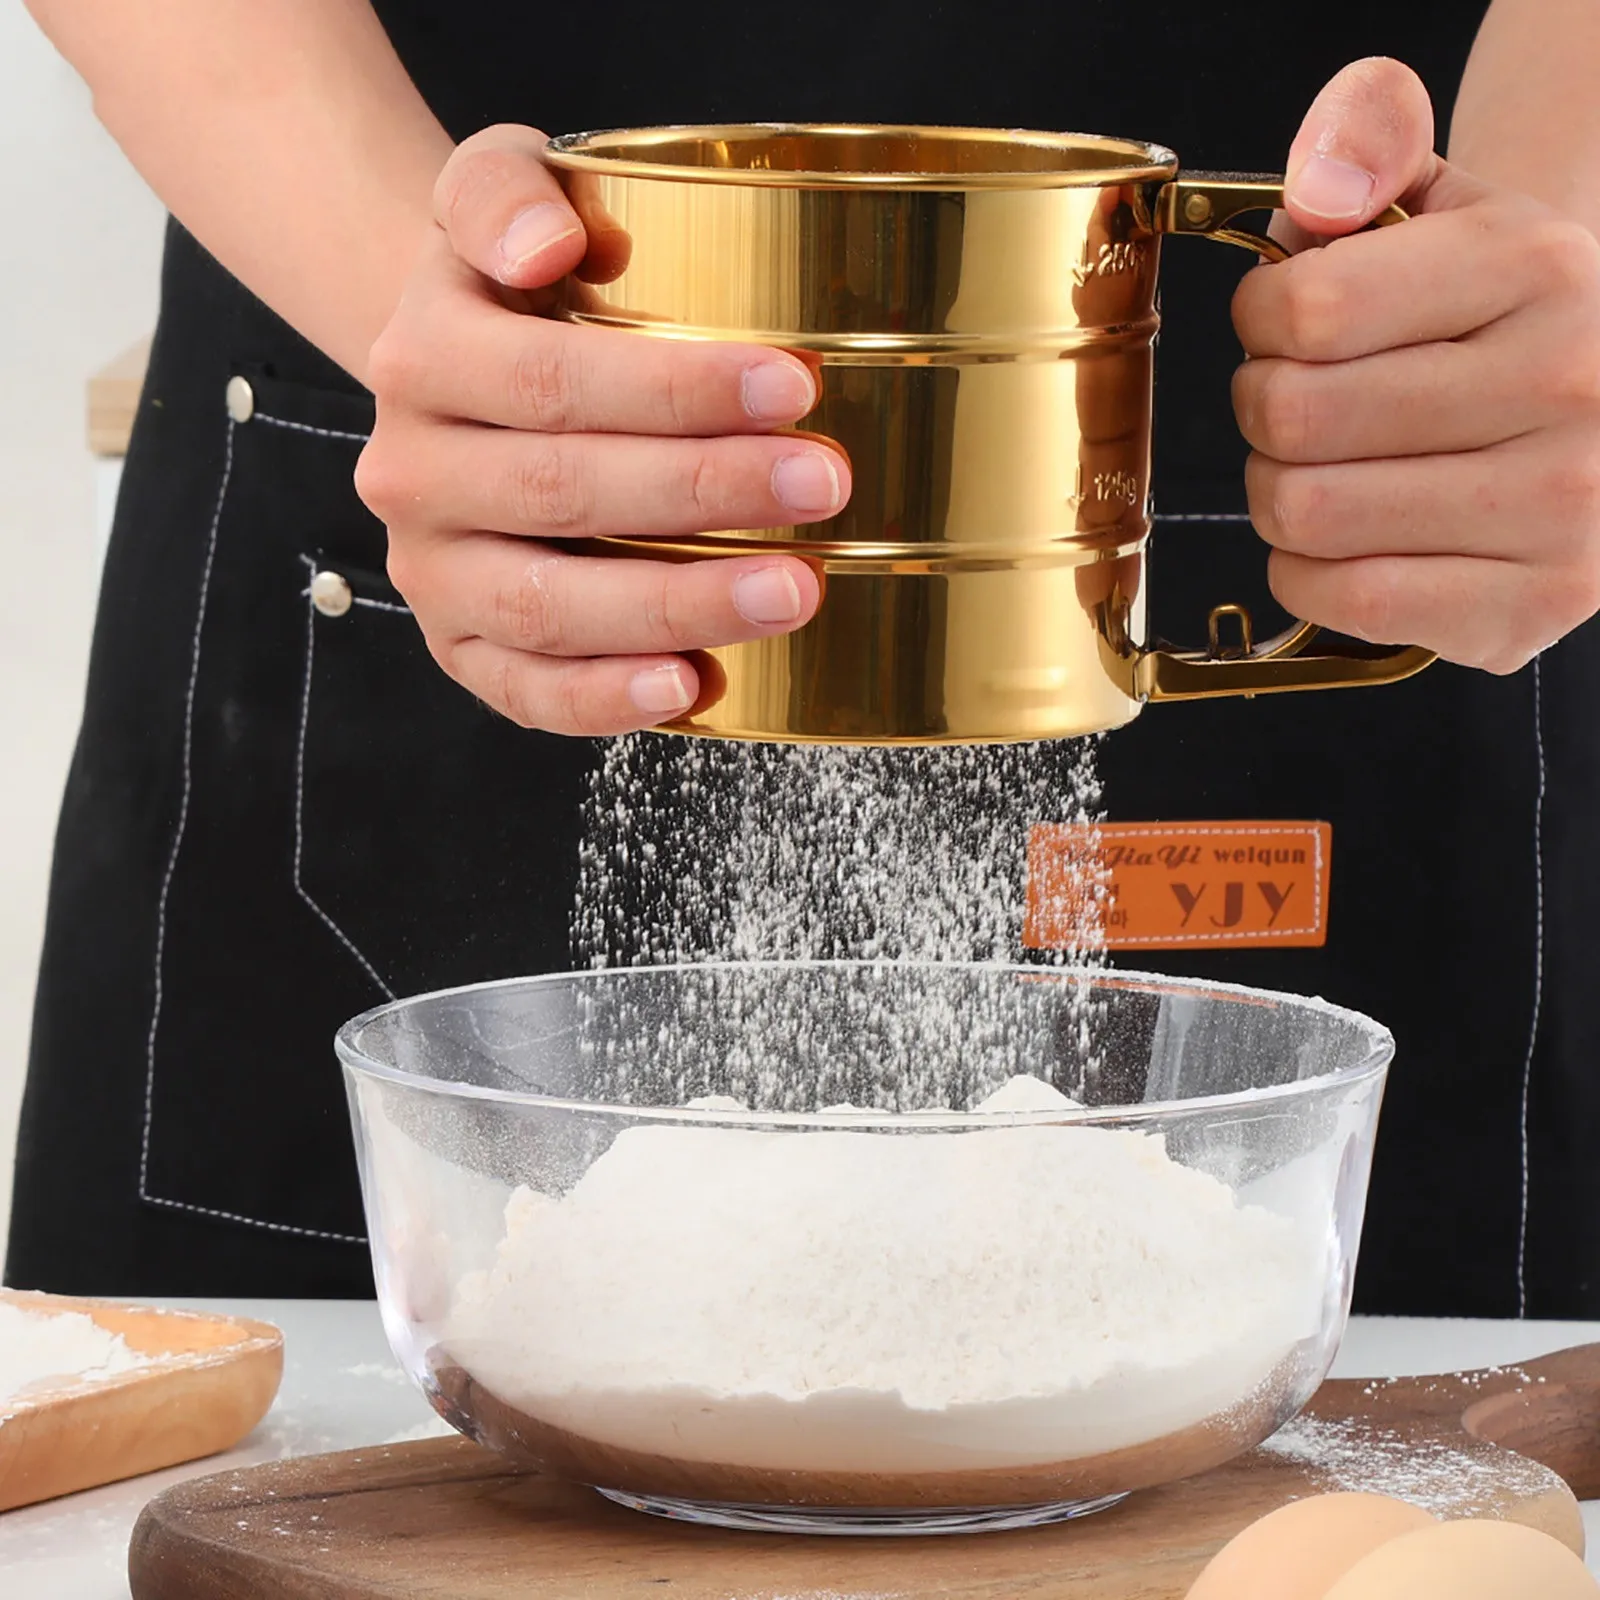 

Stainless Steel Mesh Flour Sifter Mechanical Baking Icing Sugar Shaker Sieve Cup Shape Bakeware Baking Pastry Tools для кухни